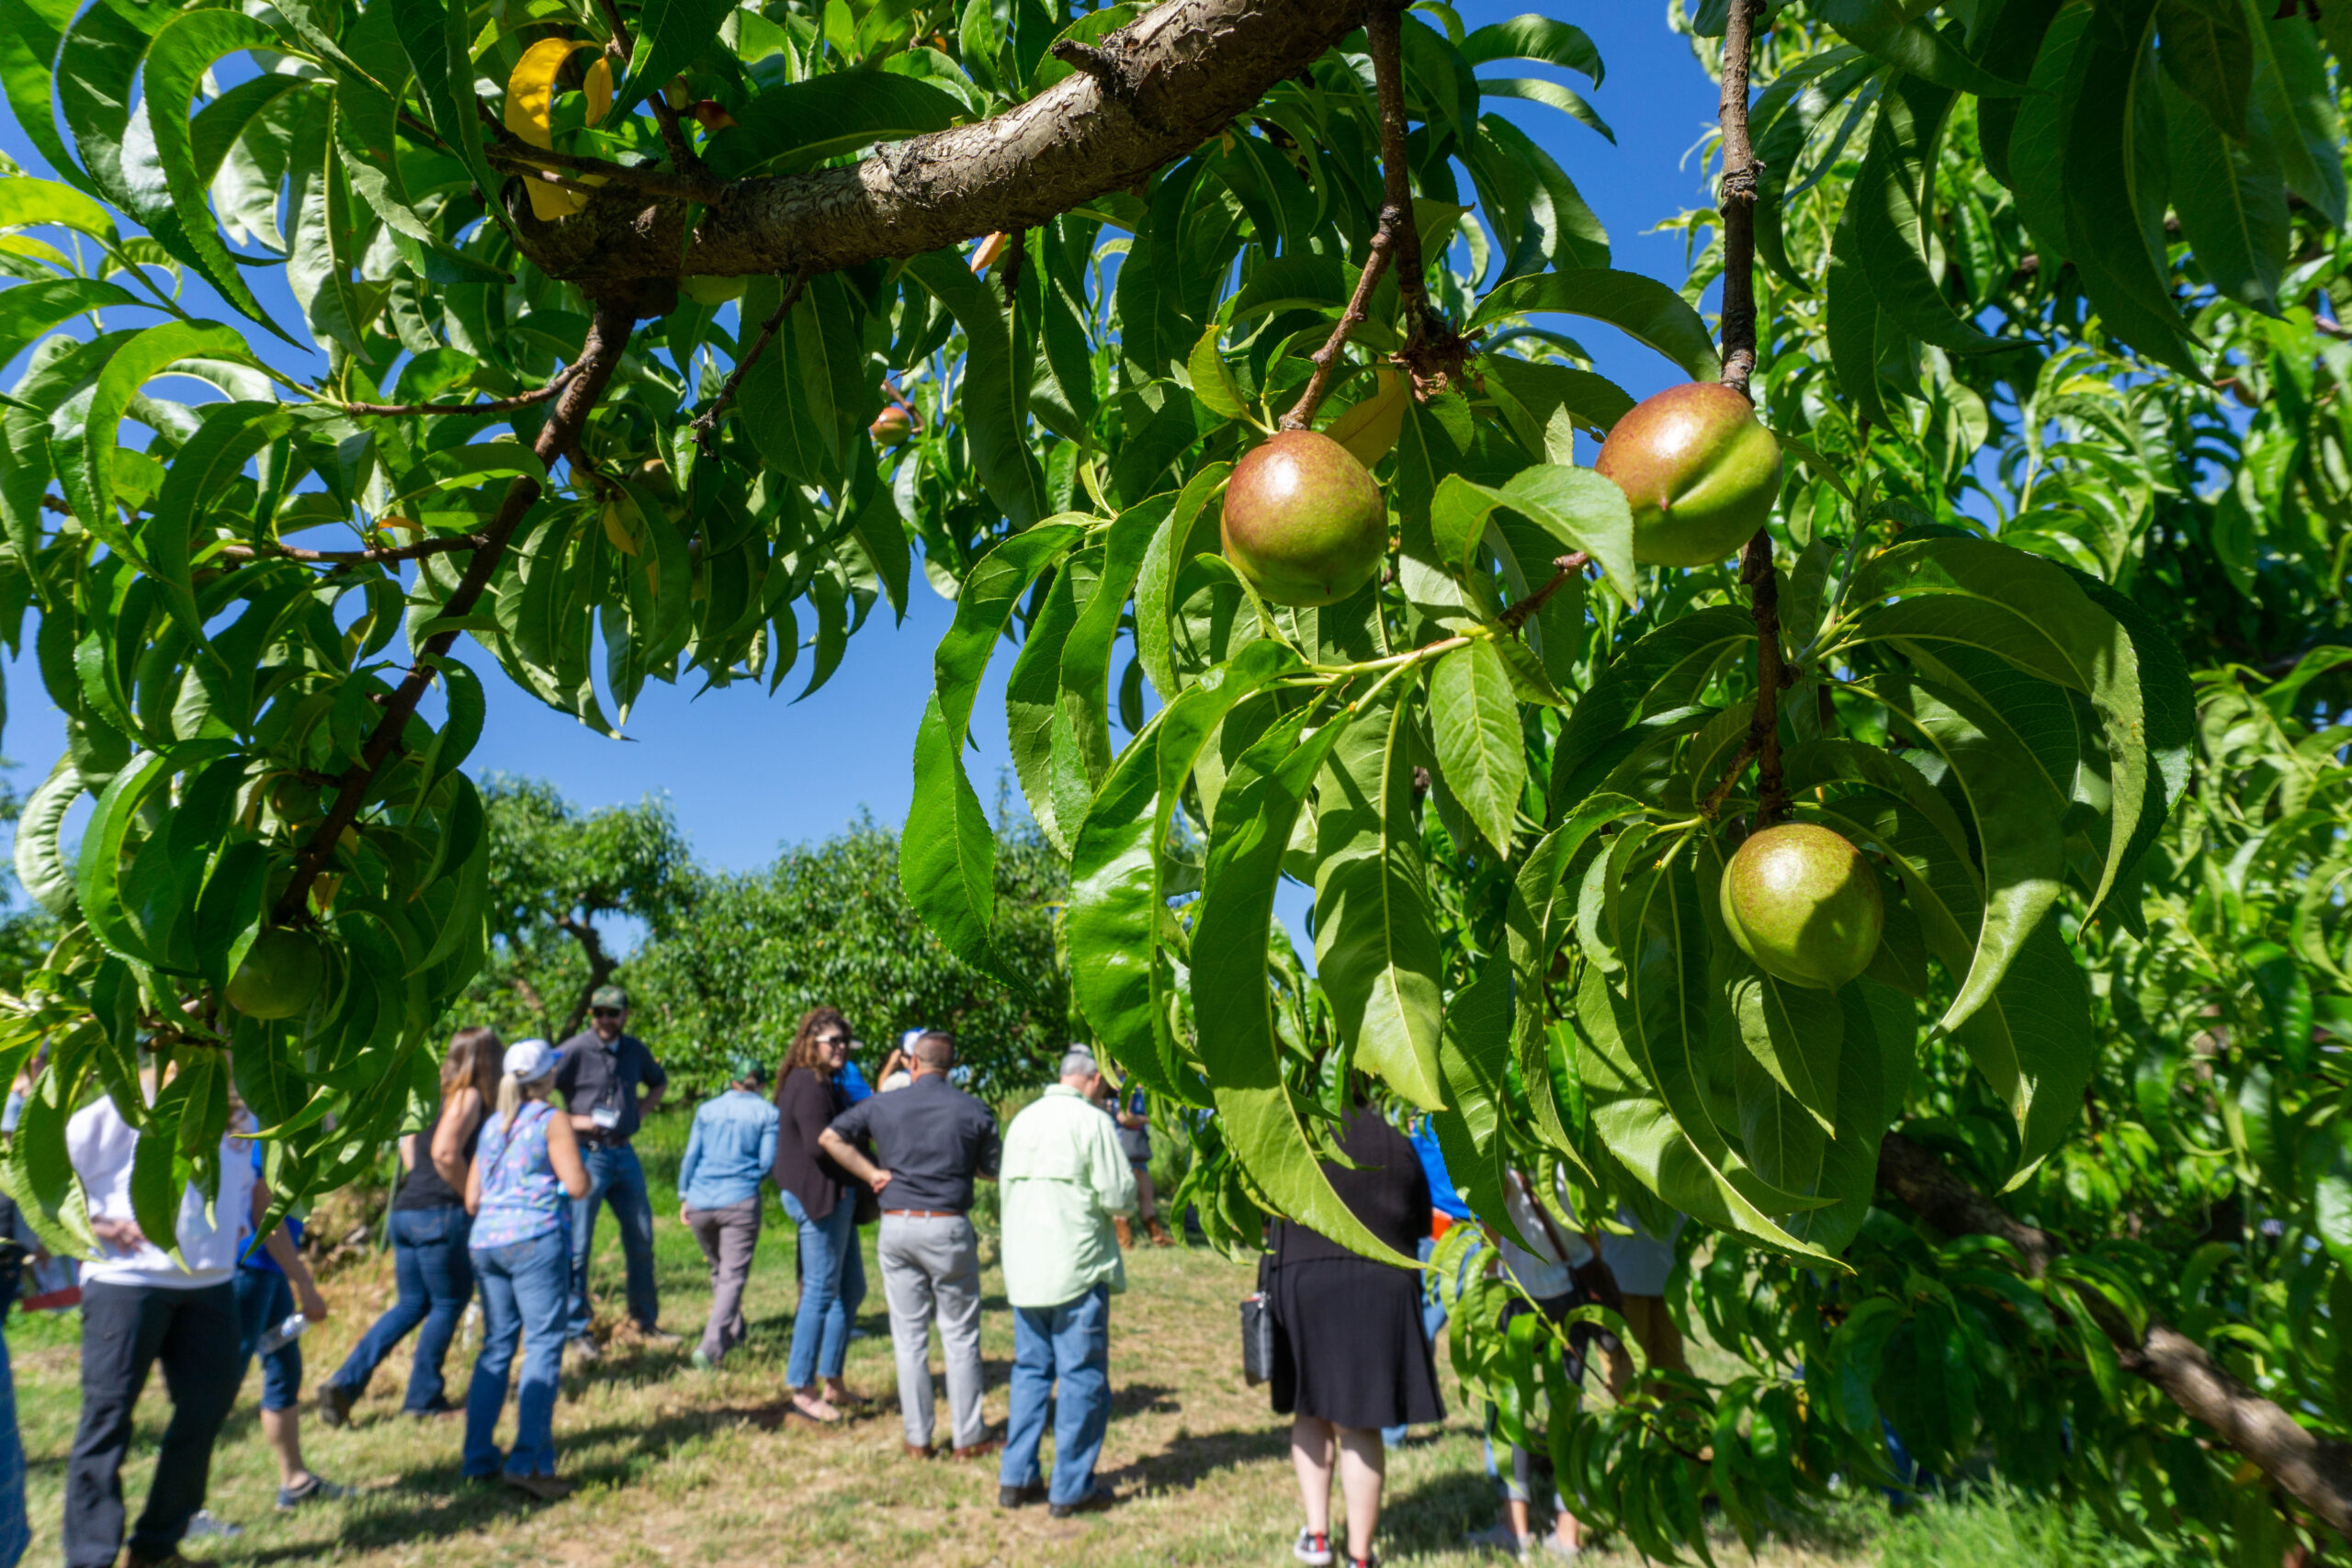 2023 Ag Tour attendees walk through Twin Peaks Orchards among ripening nectarines.